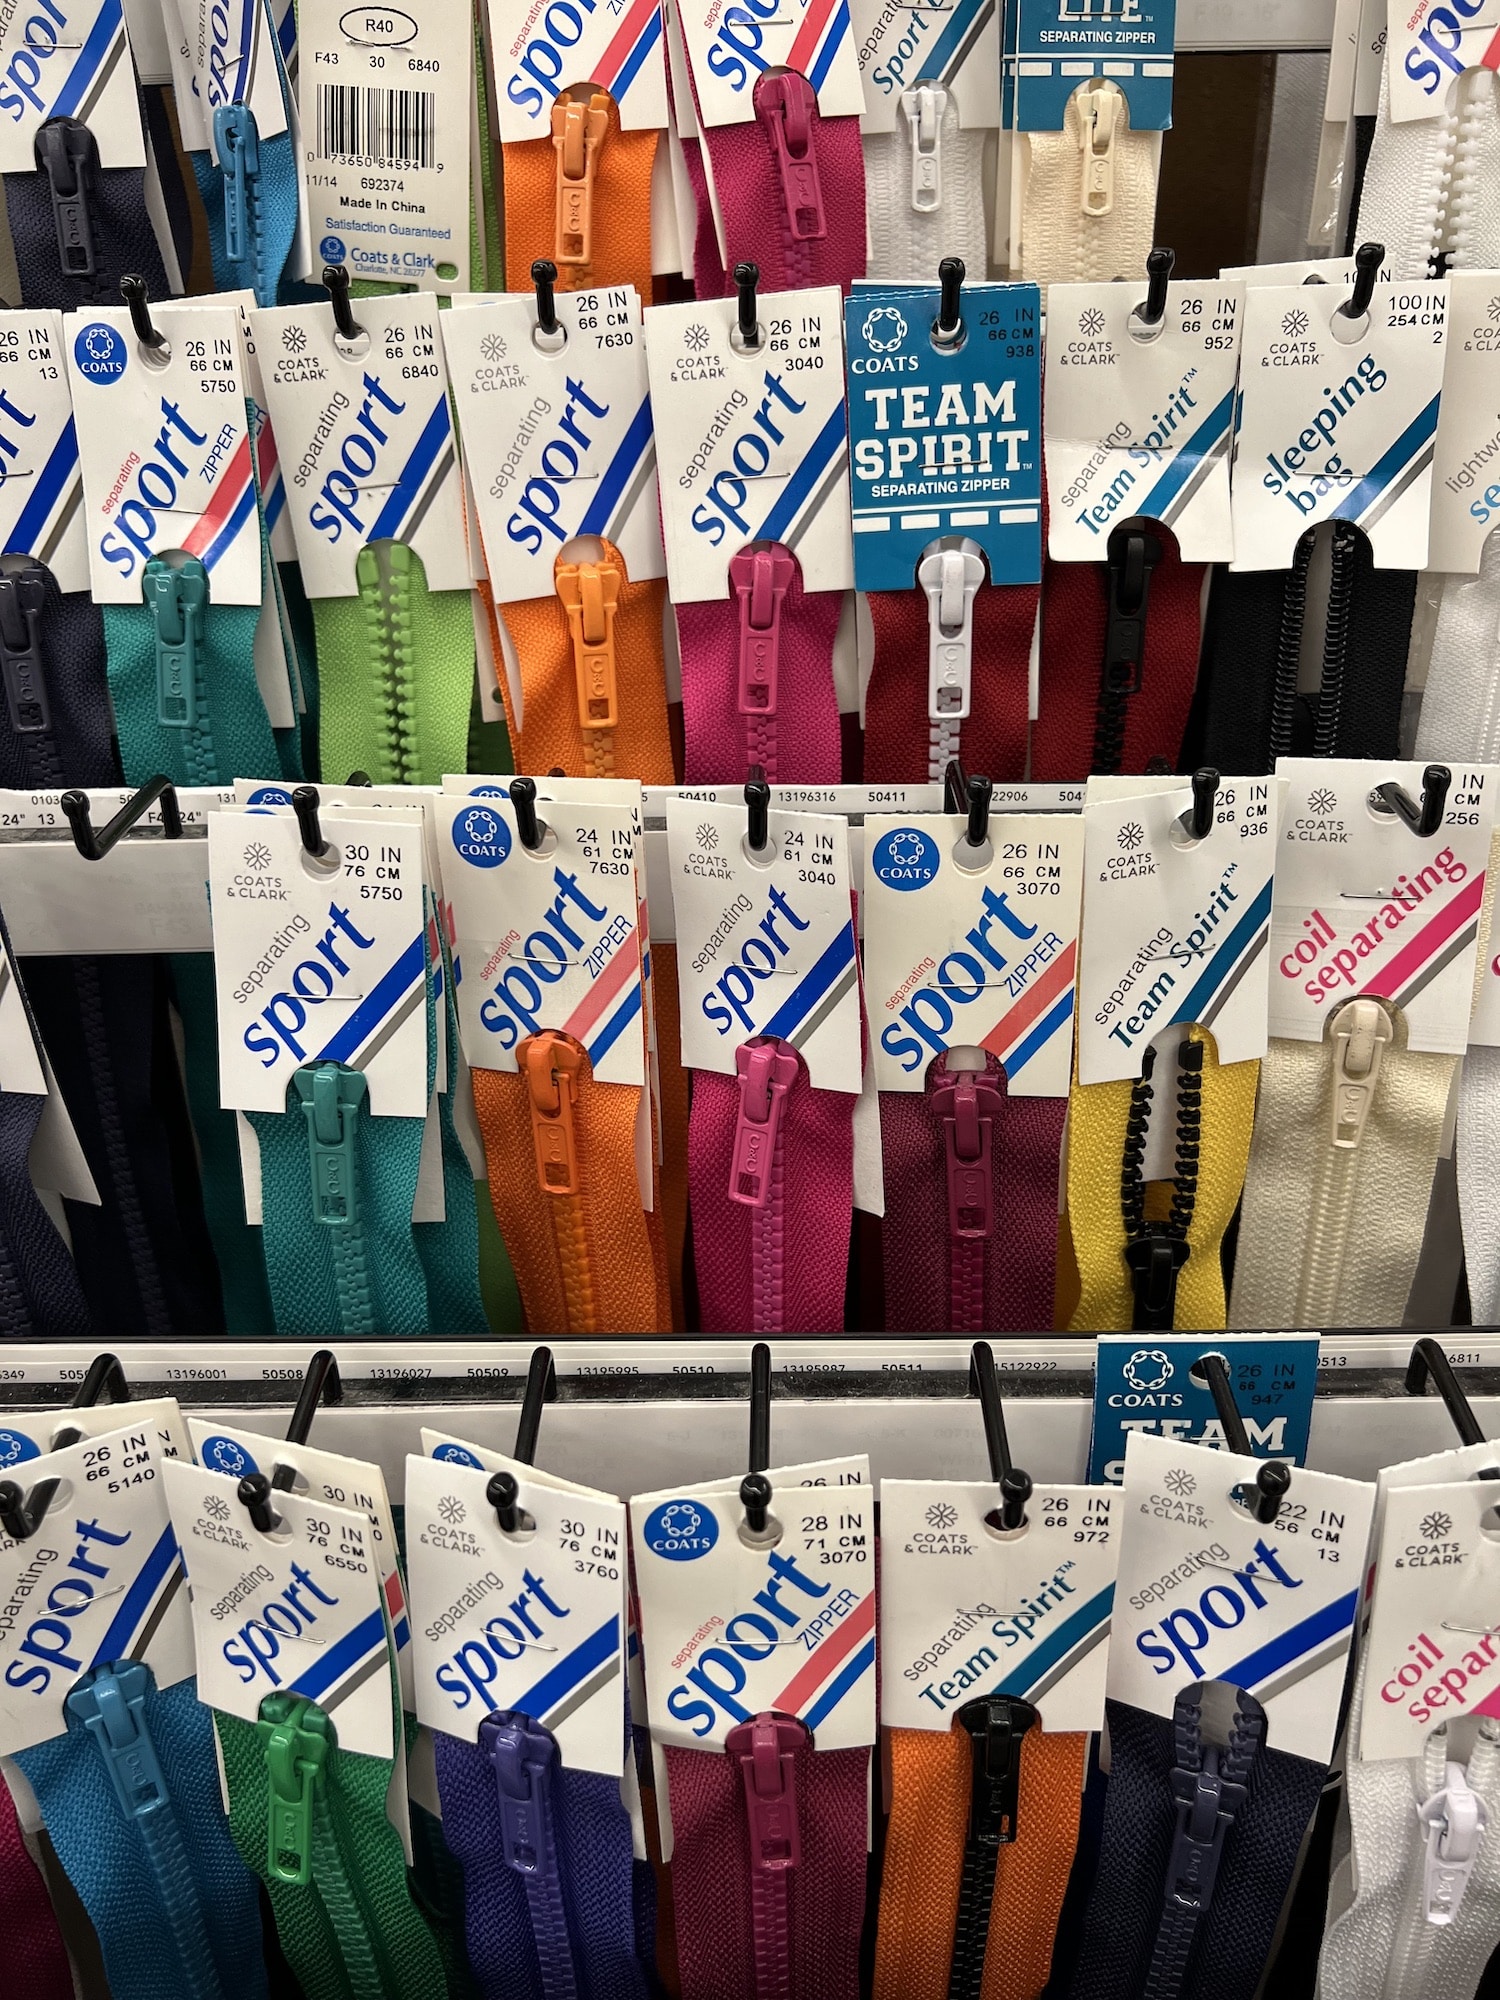 A variety of colored zippers, along with other sewing notions, on display in a store.